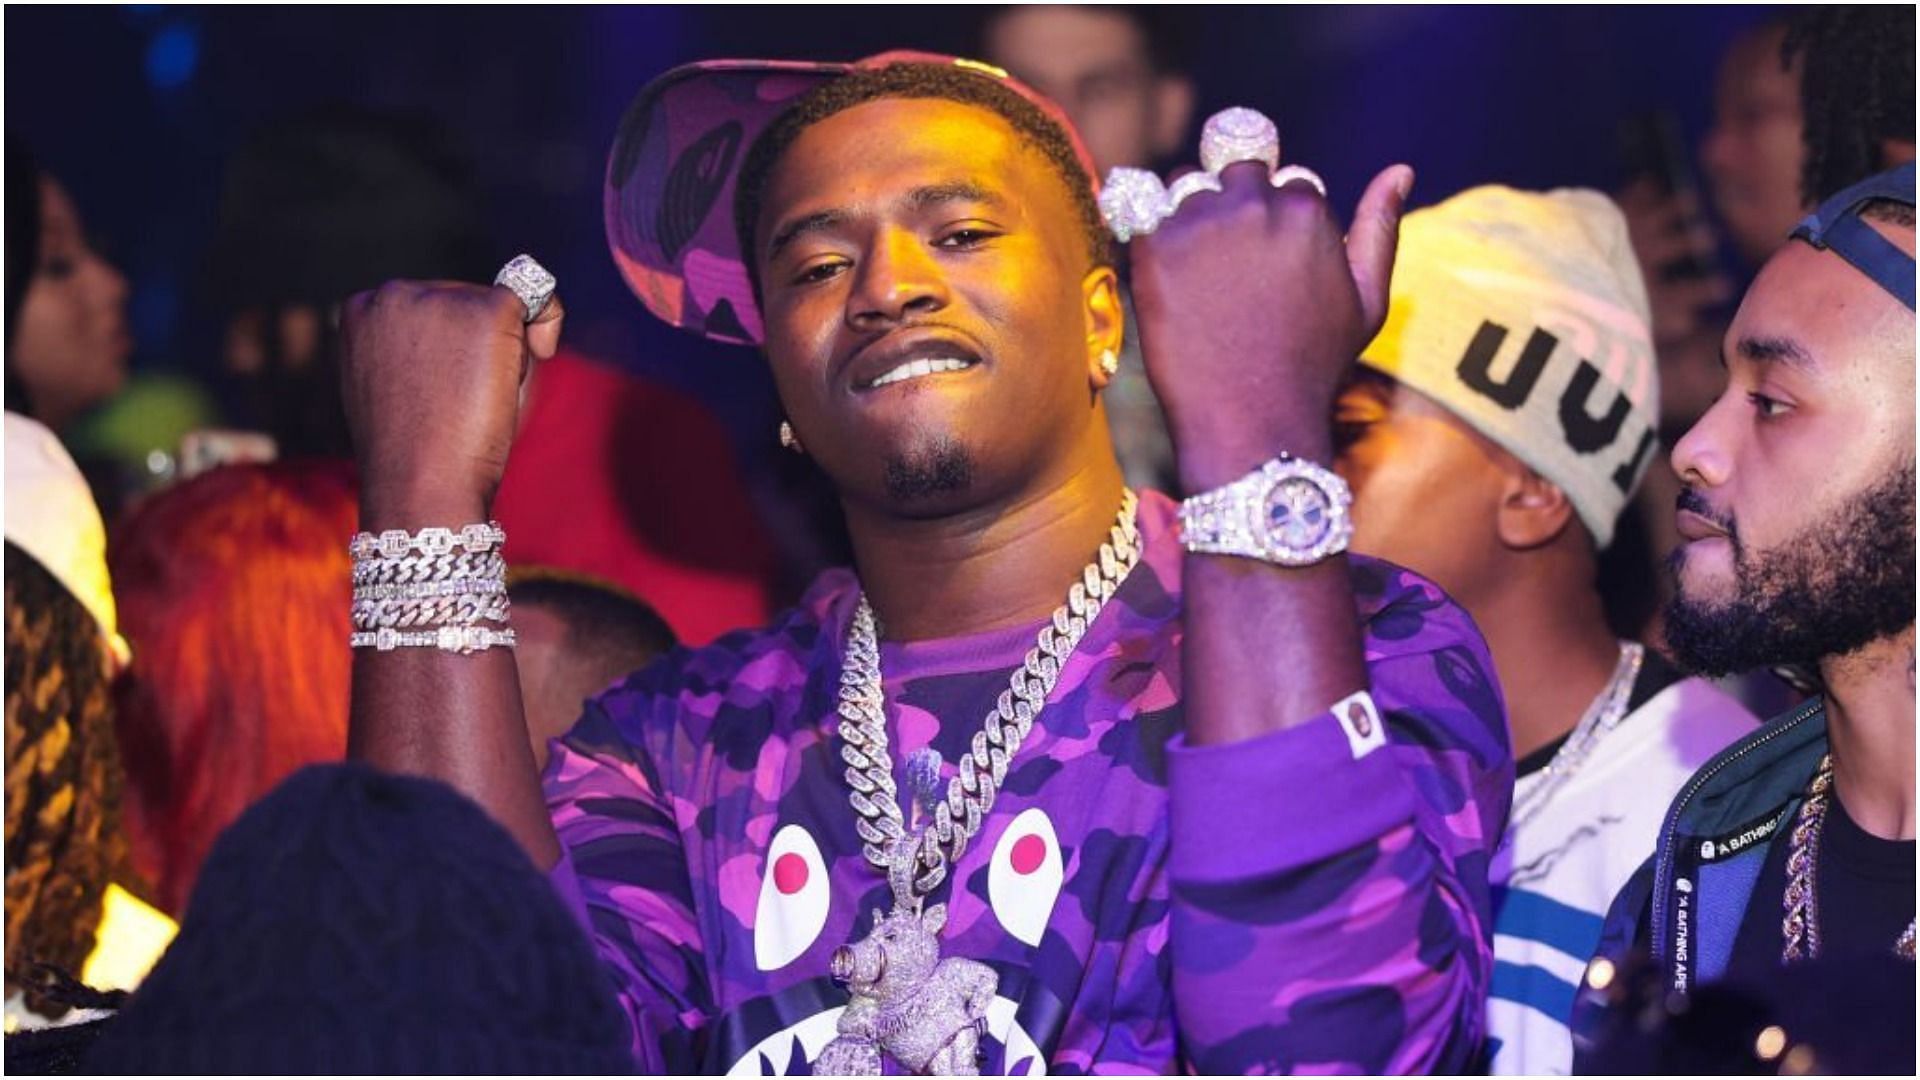 Bankroll Freddie was recently arrested on drug and gun charges (Image via Prince Williams/Getty Images)